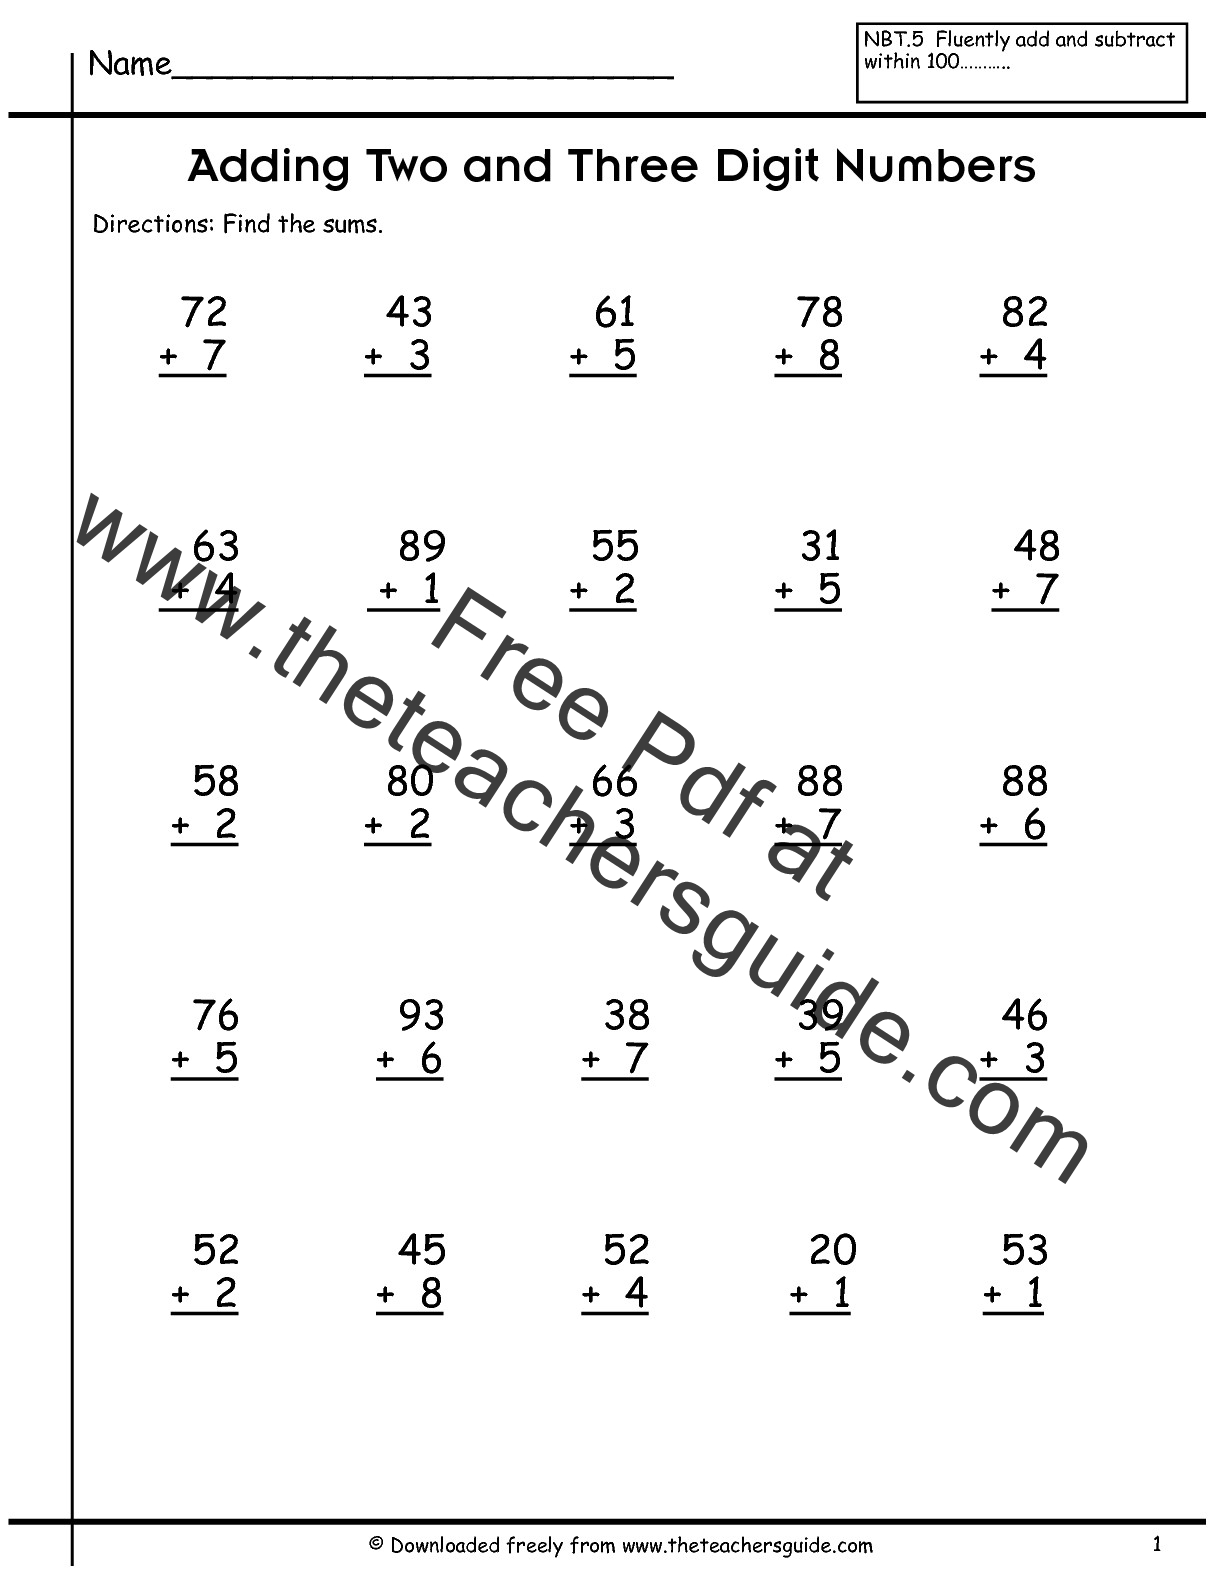 download-and-print-turtle-diary-s-adding-two-numbers-up-to-two-digits-worksheet-our-larg